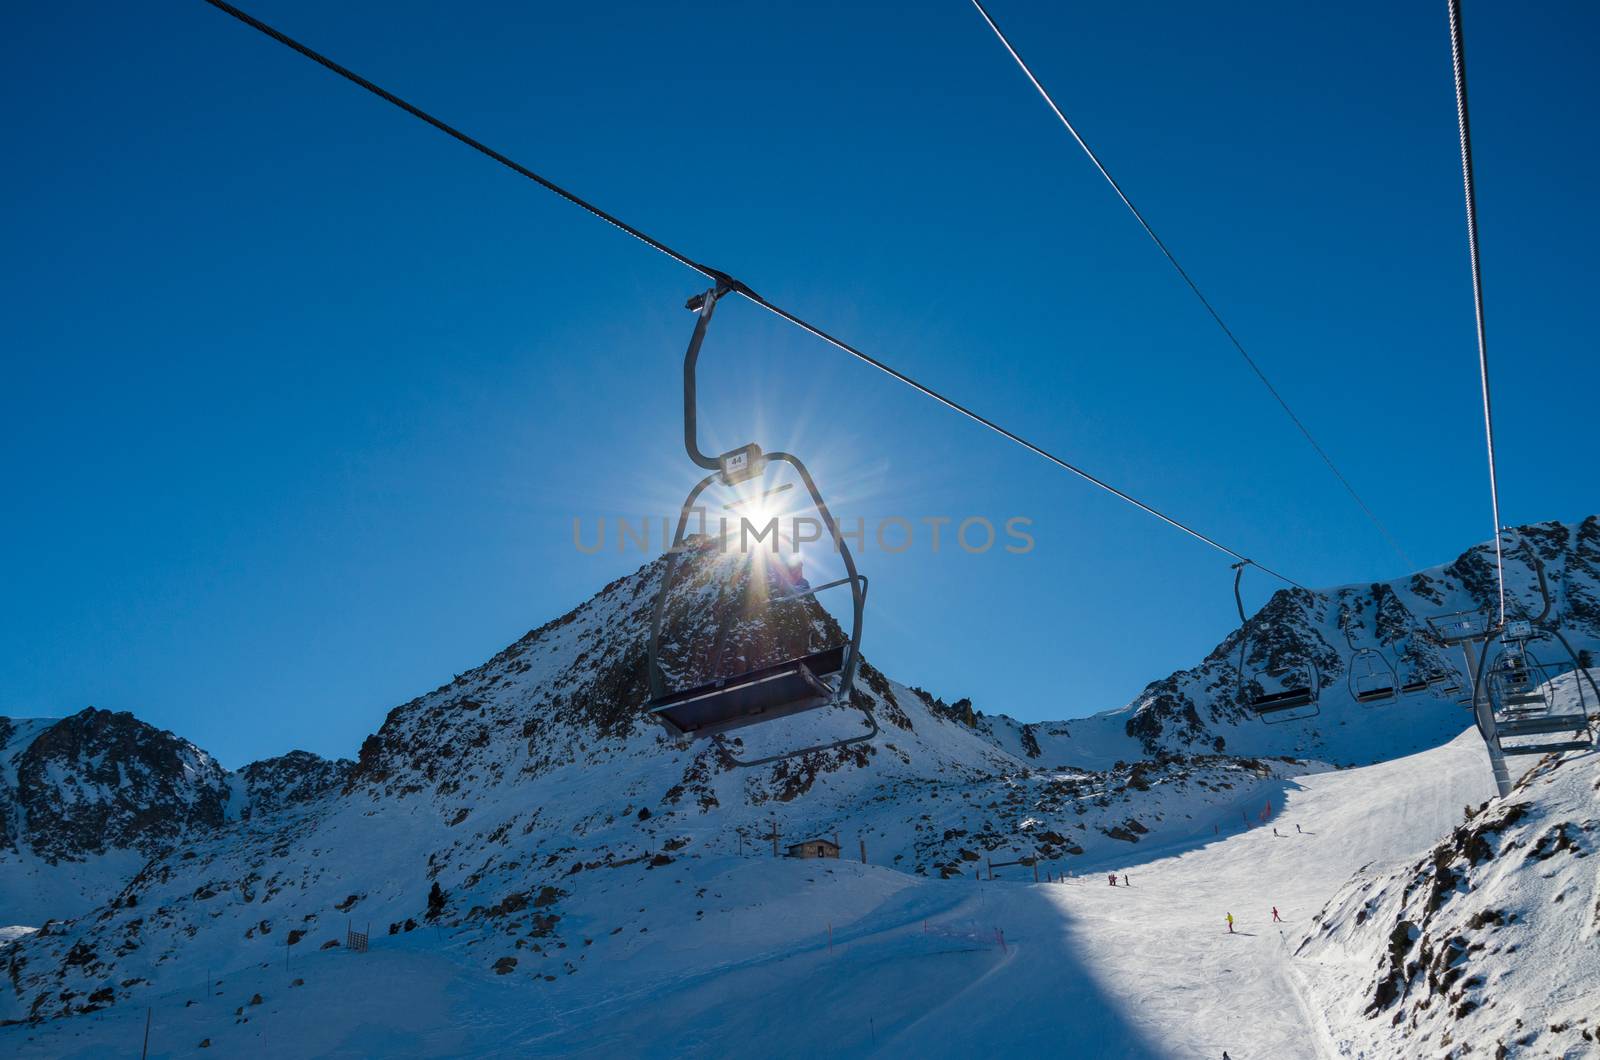 Skiing and snowboarding on the snowy slopes of prepared ski resort in Andorra